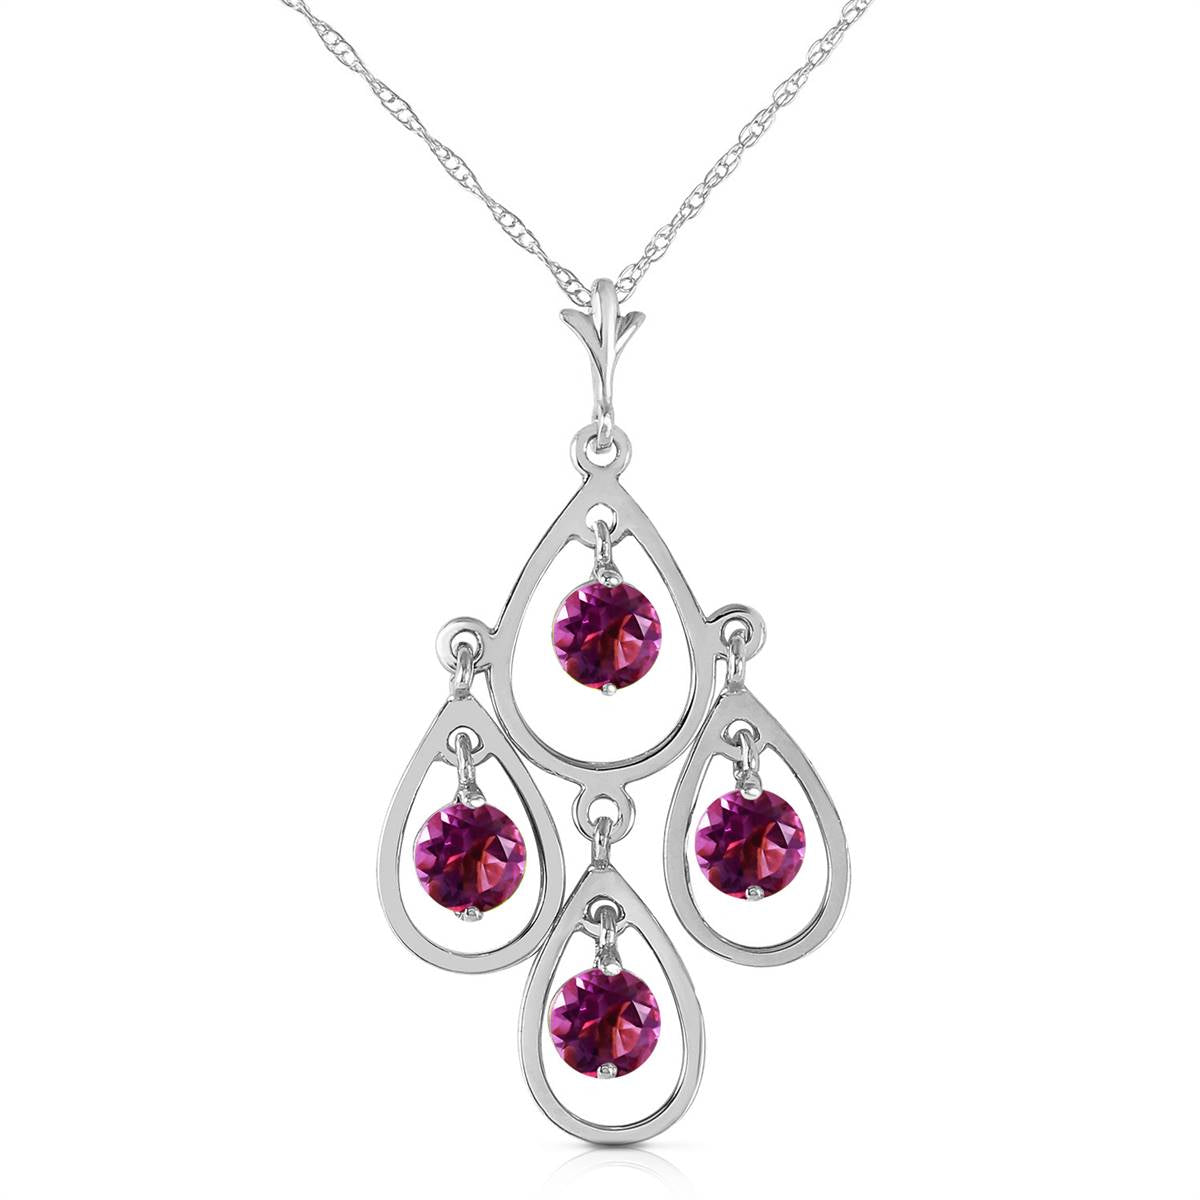 1.2 Carat 14K Solid White Gold Full Moon Amethyst Necklace